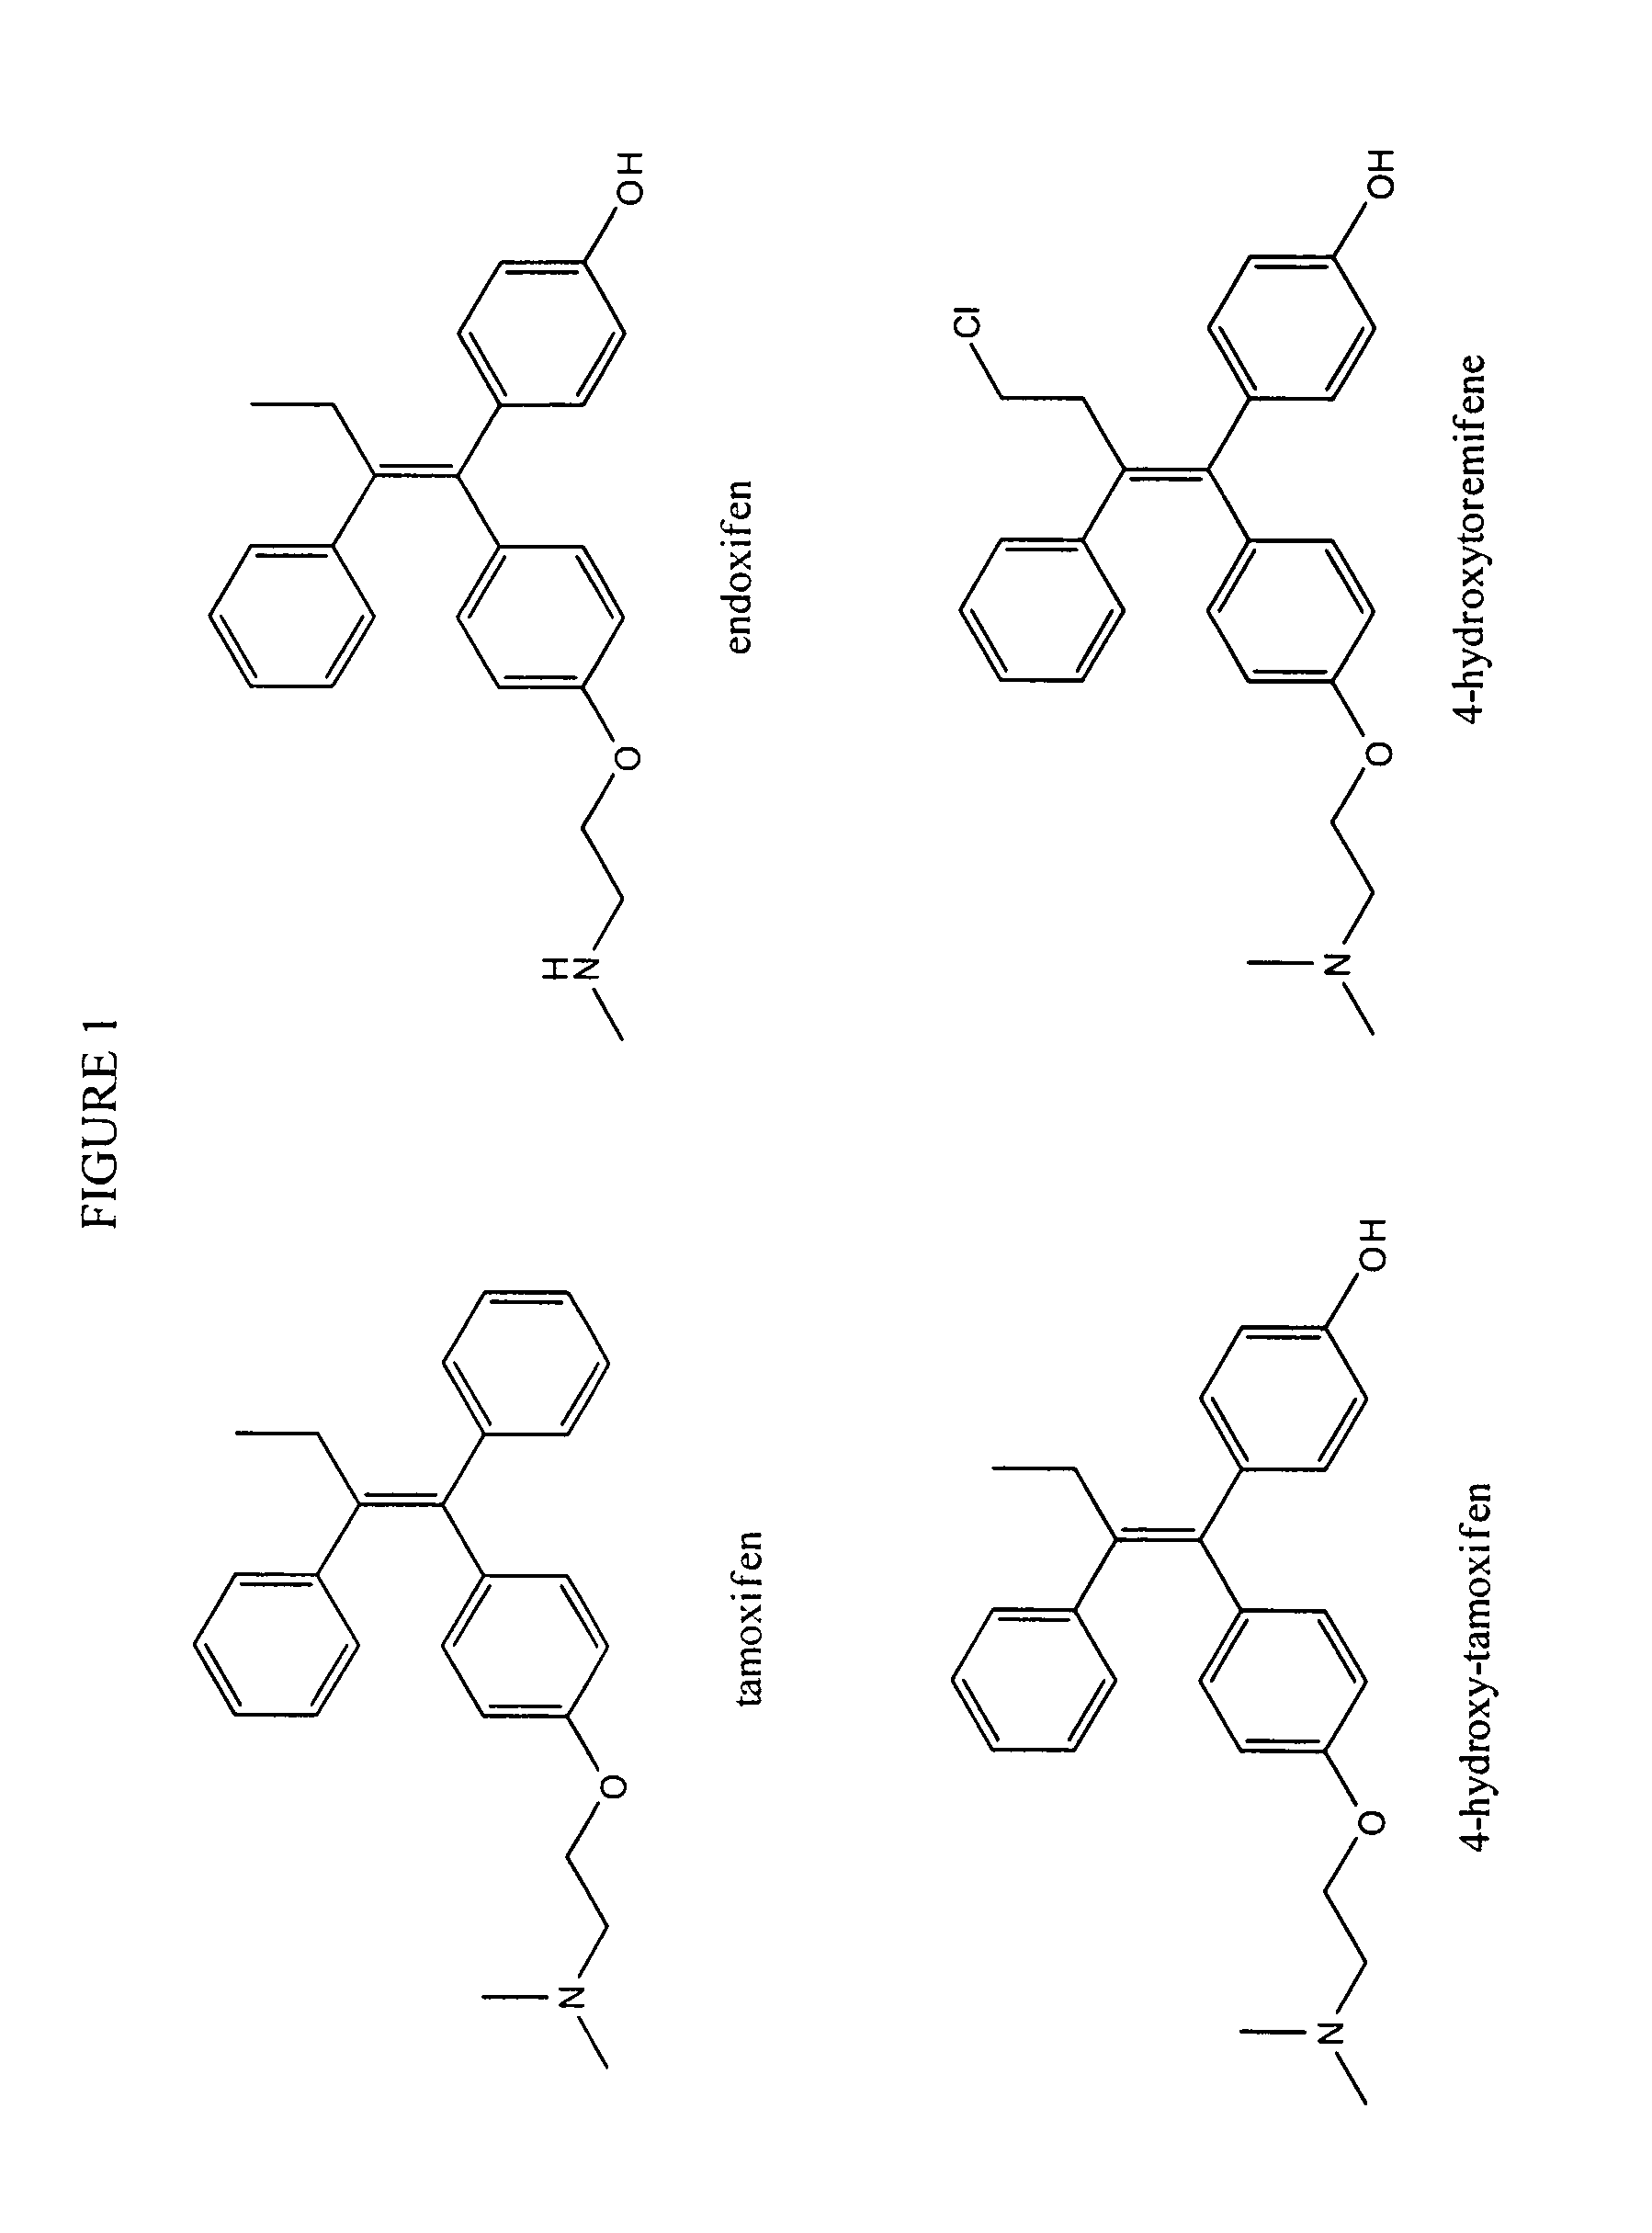 Substituted triphenyl butenes